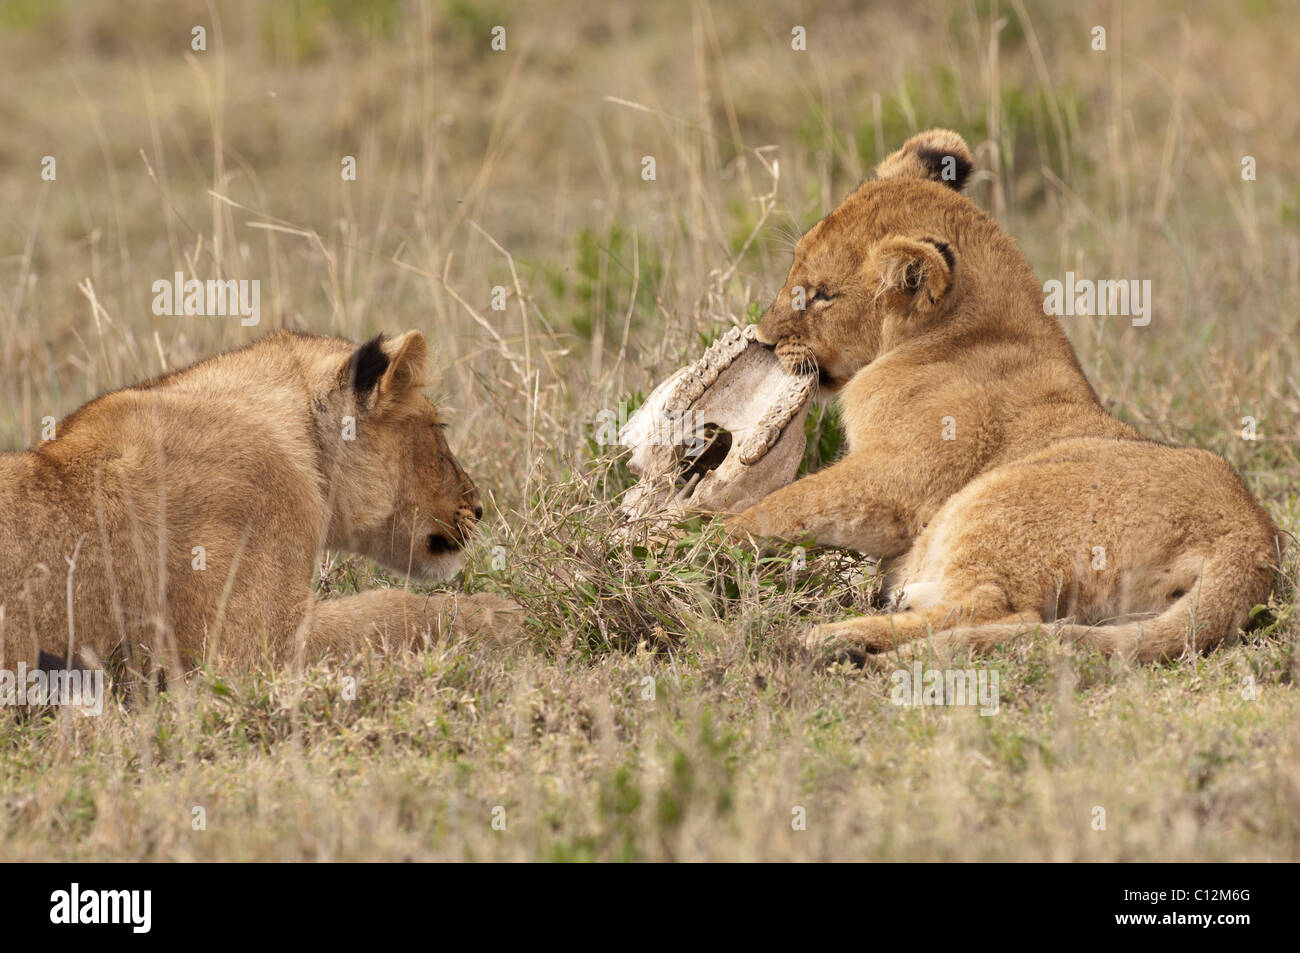 Stock photo of two young lions playing with the skull of a zebra. Stock Photo